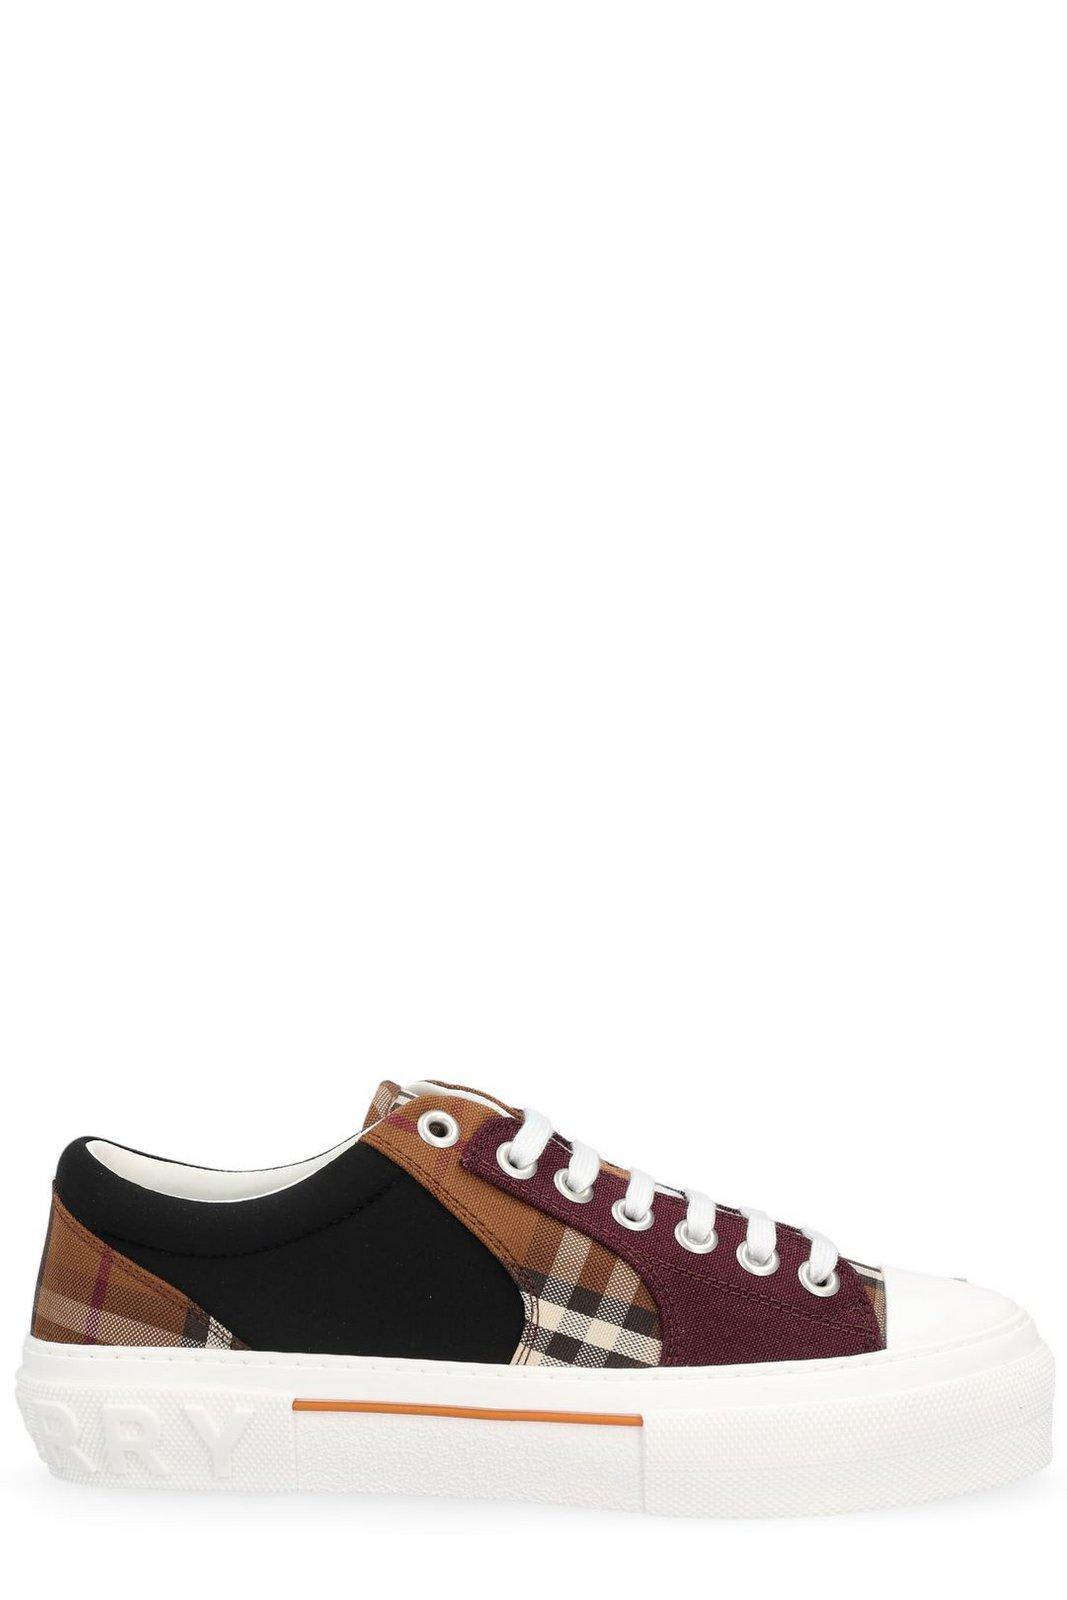 Burberry Vintage Check Printed Lace-up Sneakers